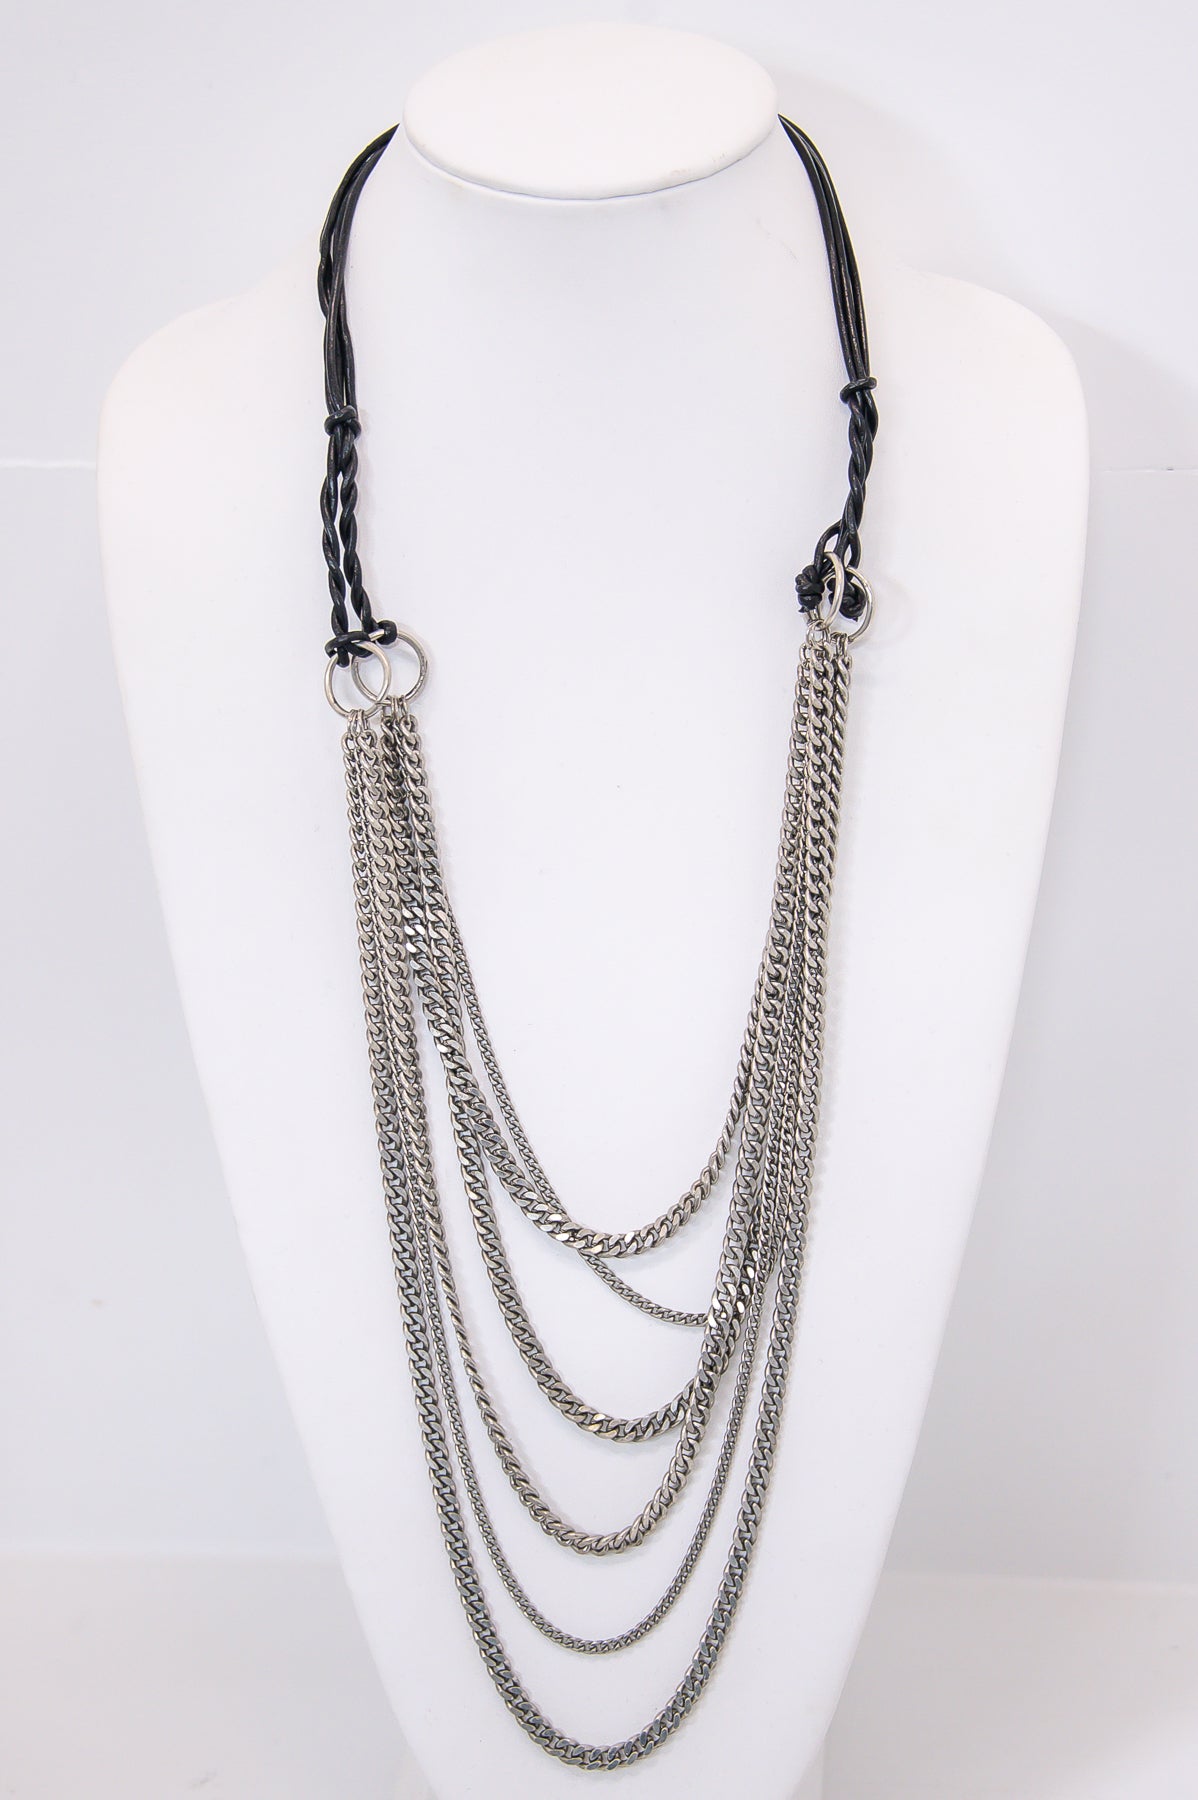 Silver/Black Layered Chain Link Necklace - NEK4293SI